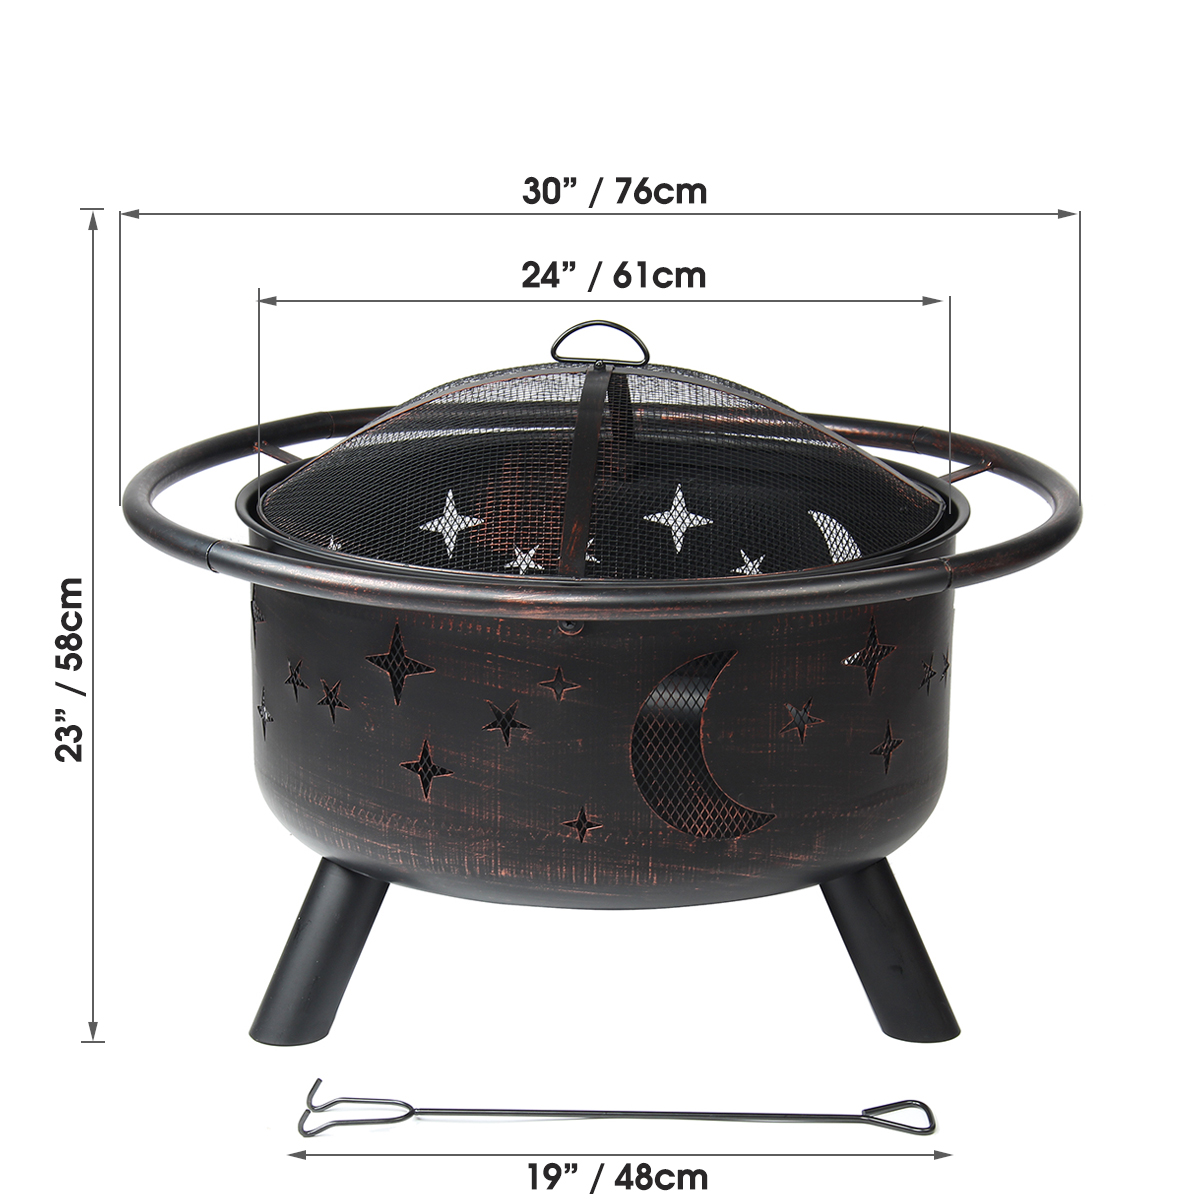 Bestgoods 30" Outdoor Fire Pit, Vintage Round Metal Firepit Bonfire Wood Burning Heater Stove Backyard Patio Garden Firepit with Spark Screen and Fireplace Poker - EASY ASSEMBLY - image 2 of 10